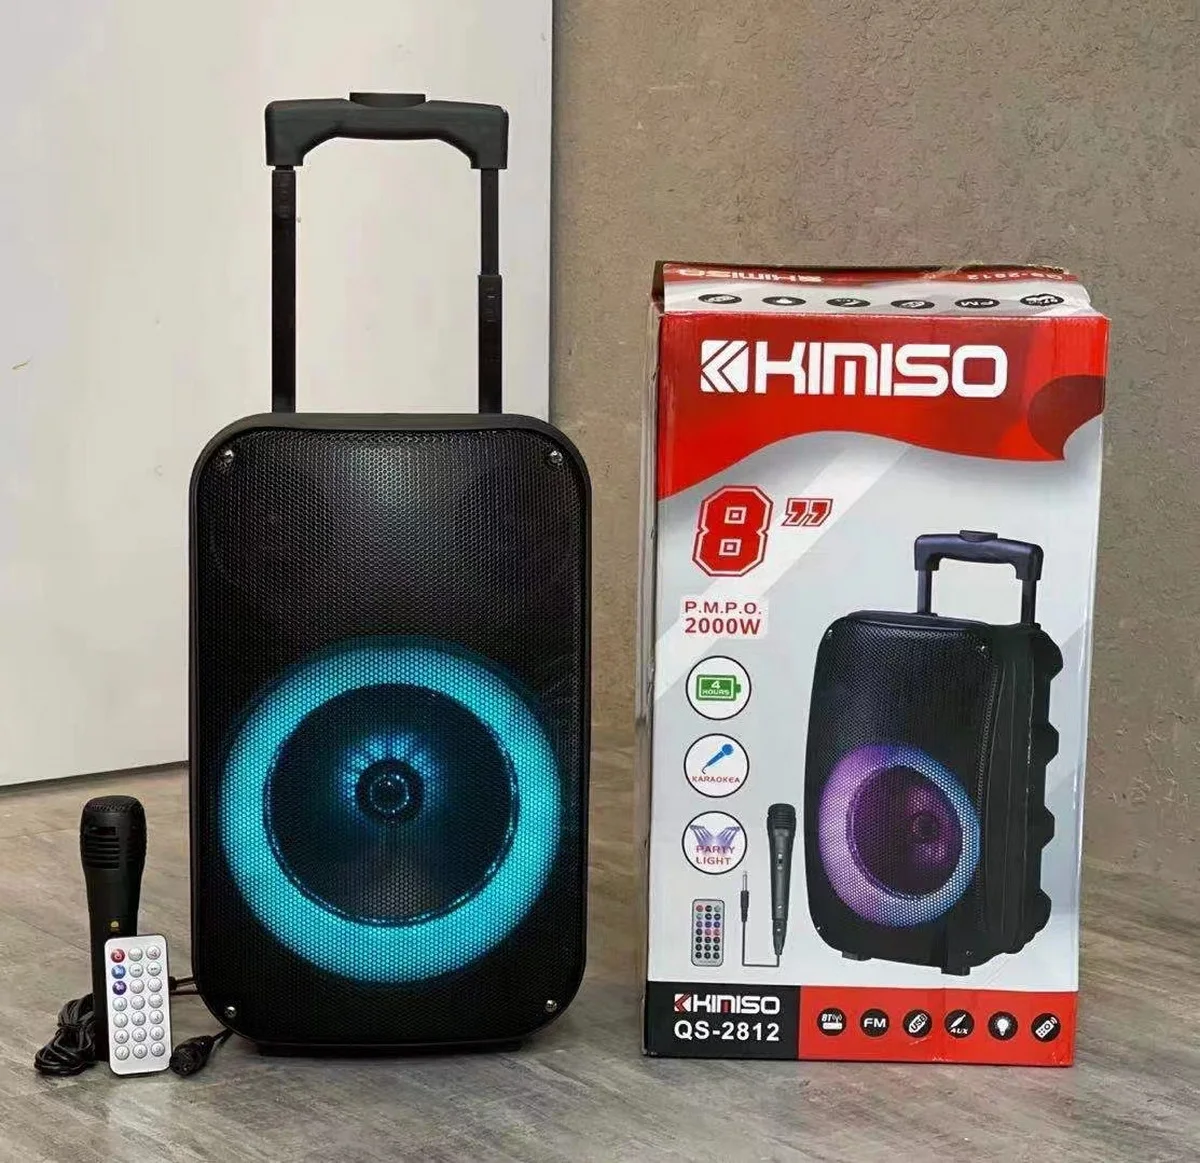 

QS-2812 Kimiso New arrival 8inch speaker quality sound wireless trolley speaker with wired MIC